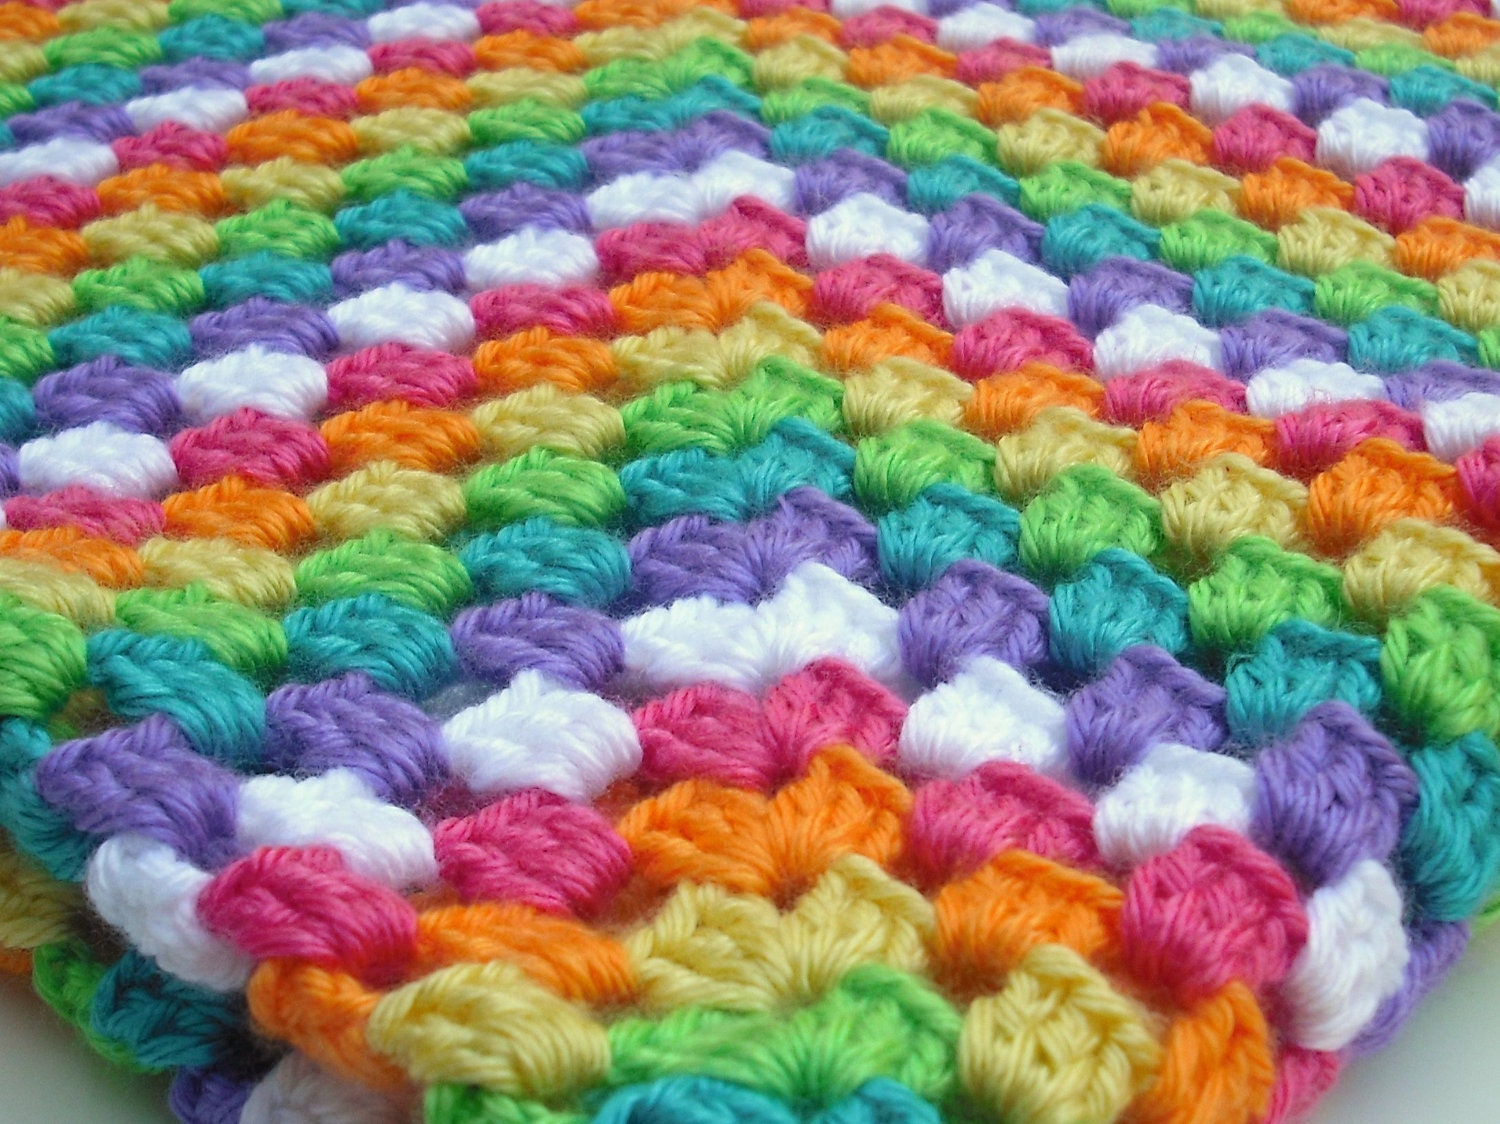 Crocheted Baby Blanket or Lap Afghan Rainbow Granny Square